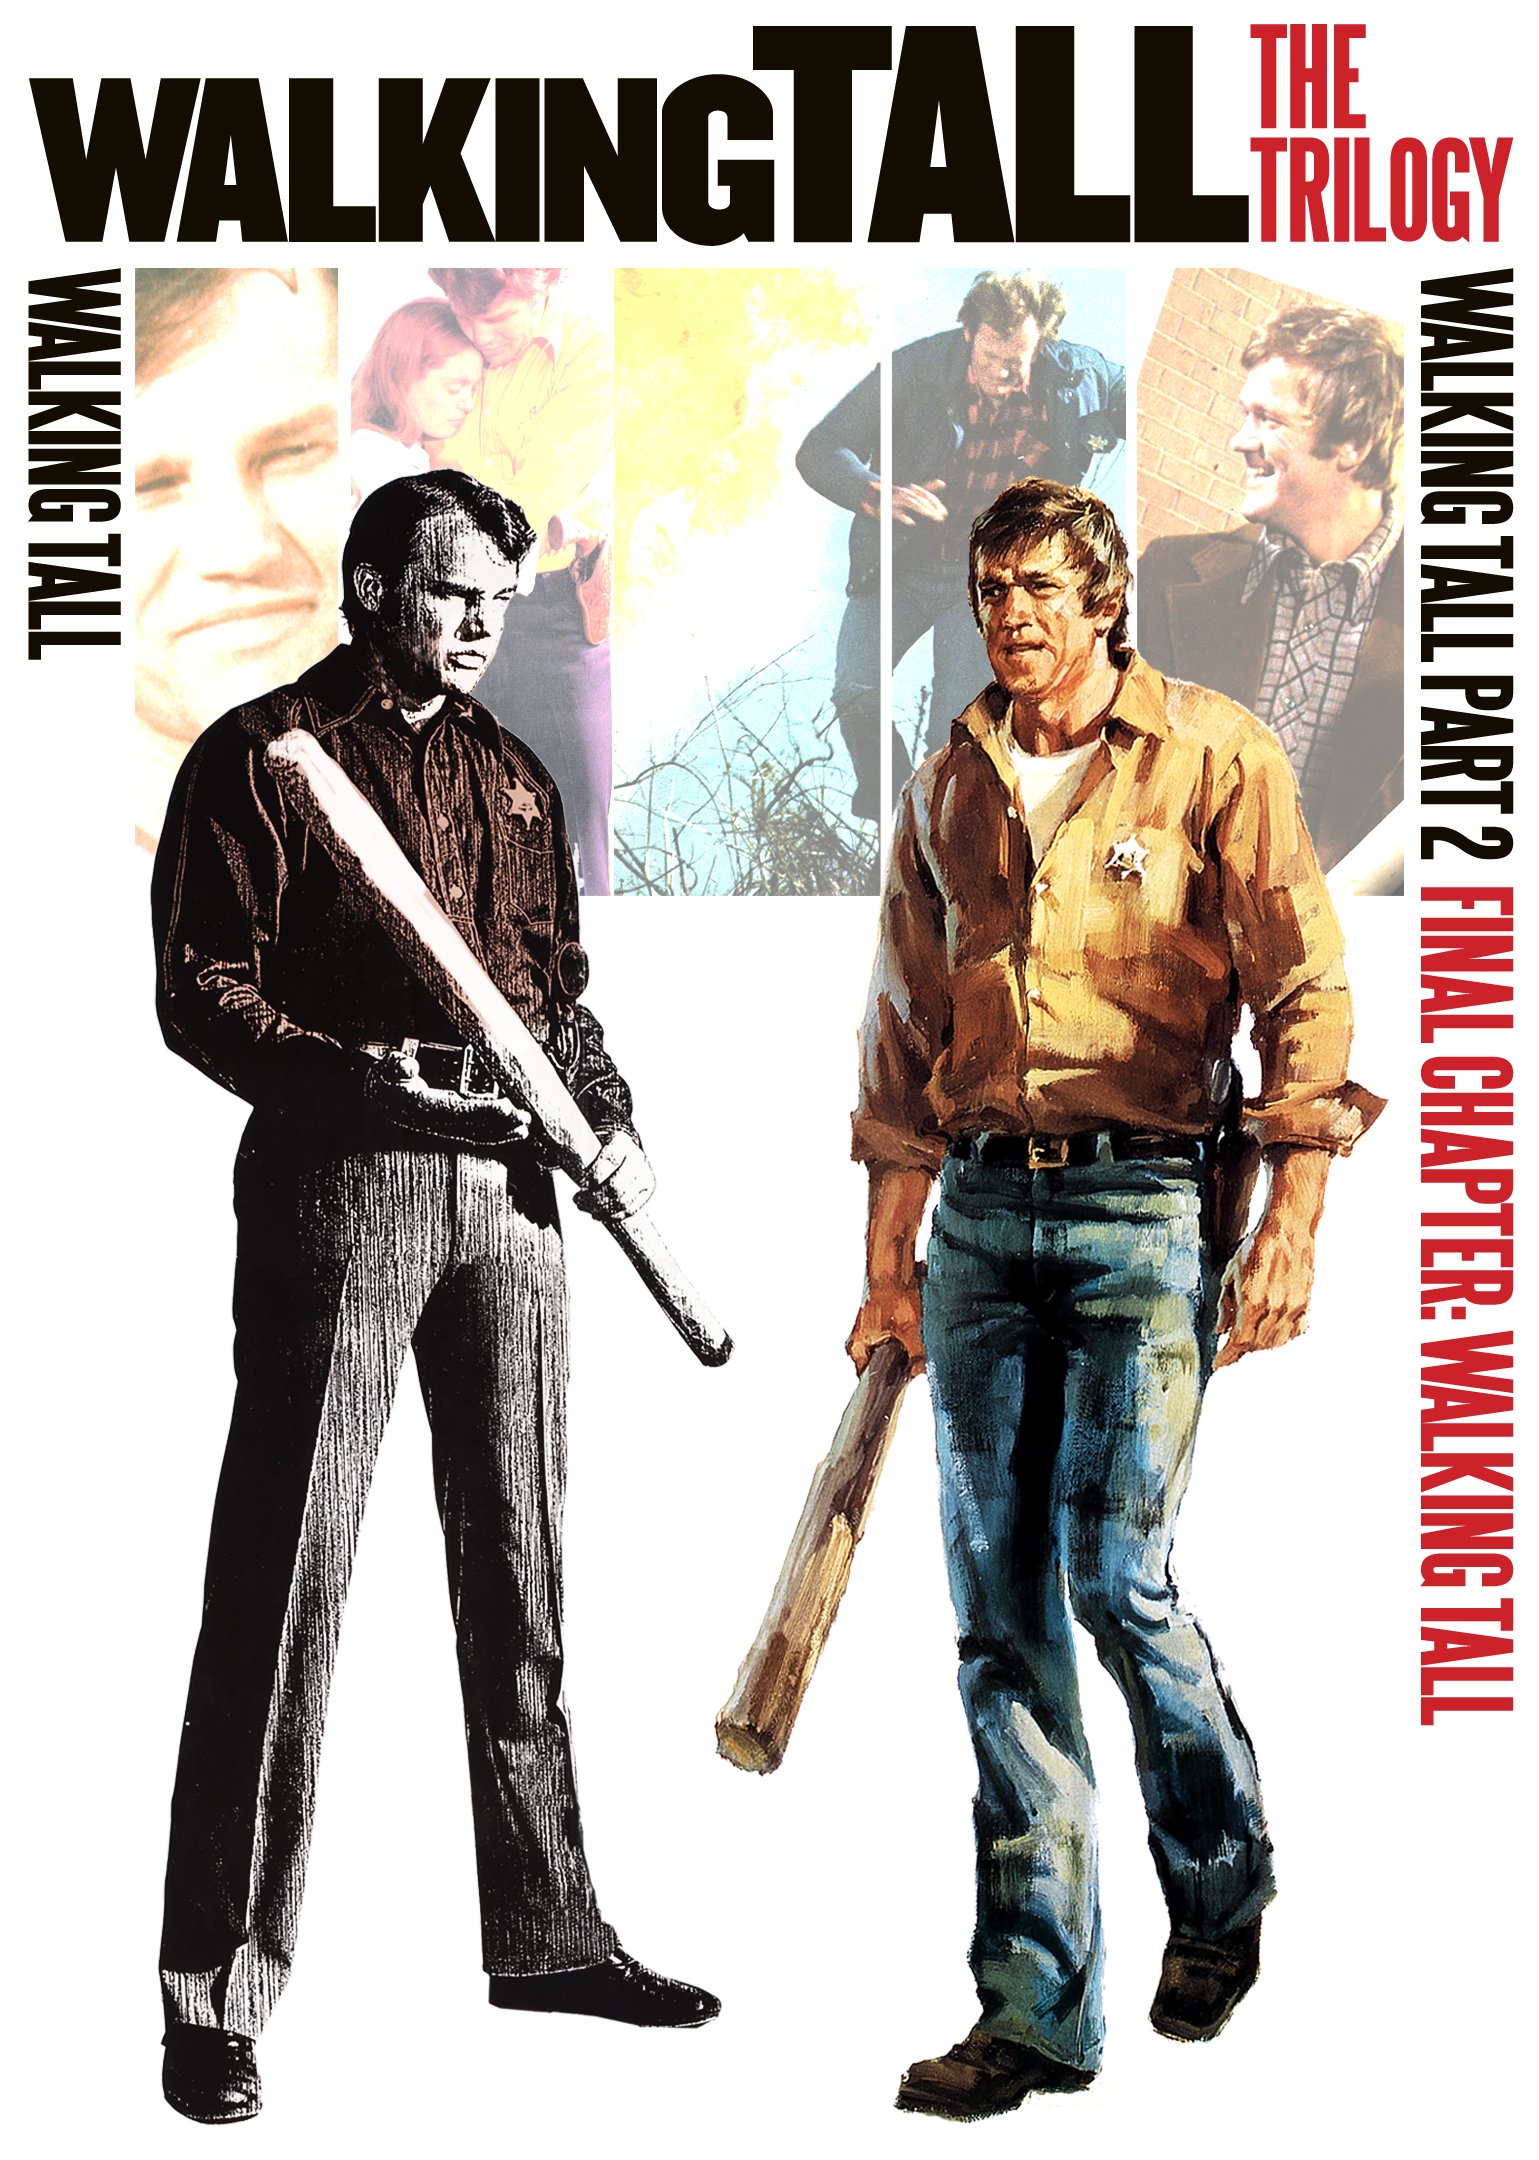 Walking Tall: The Trilogy (DVD) - image 2 of 4